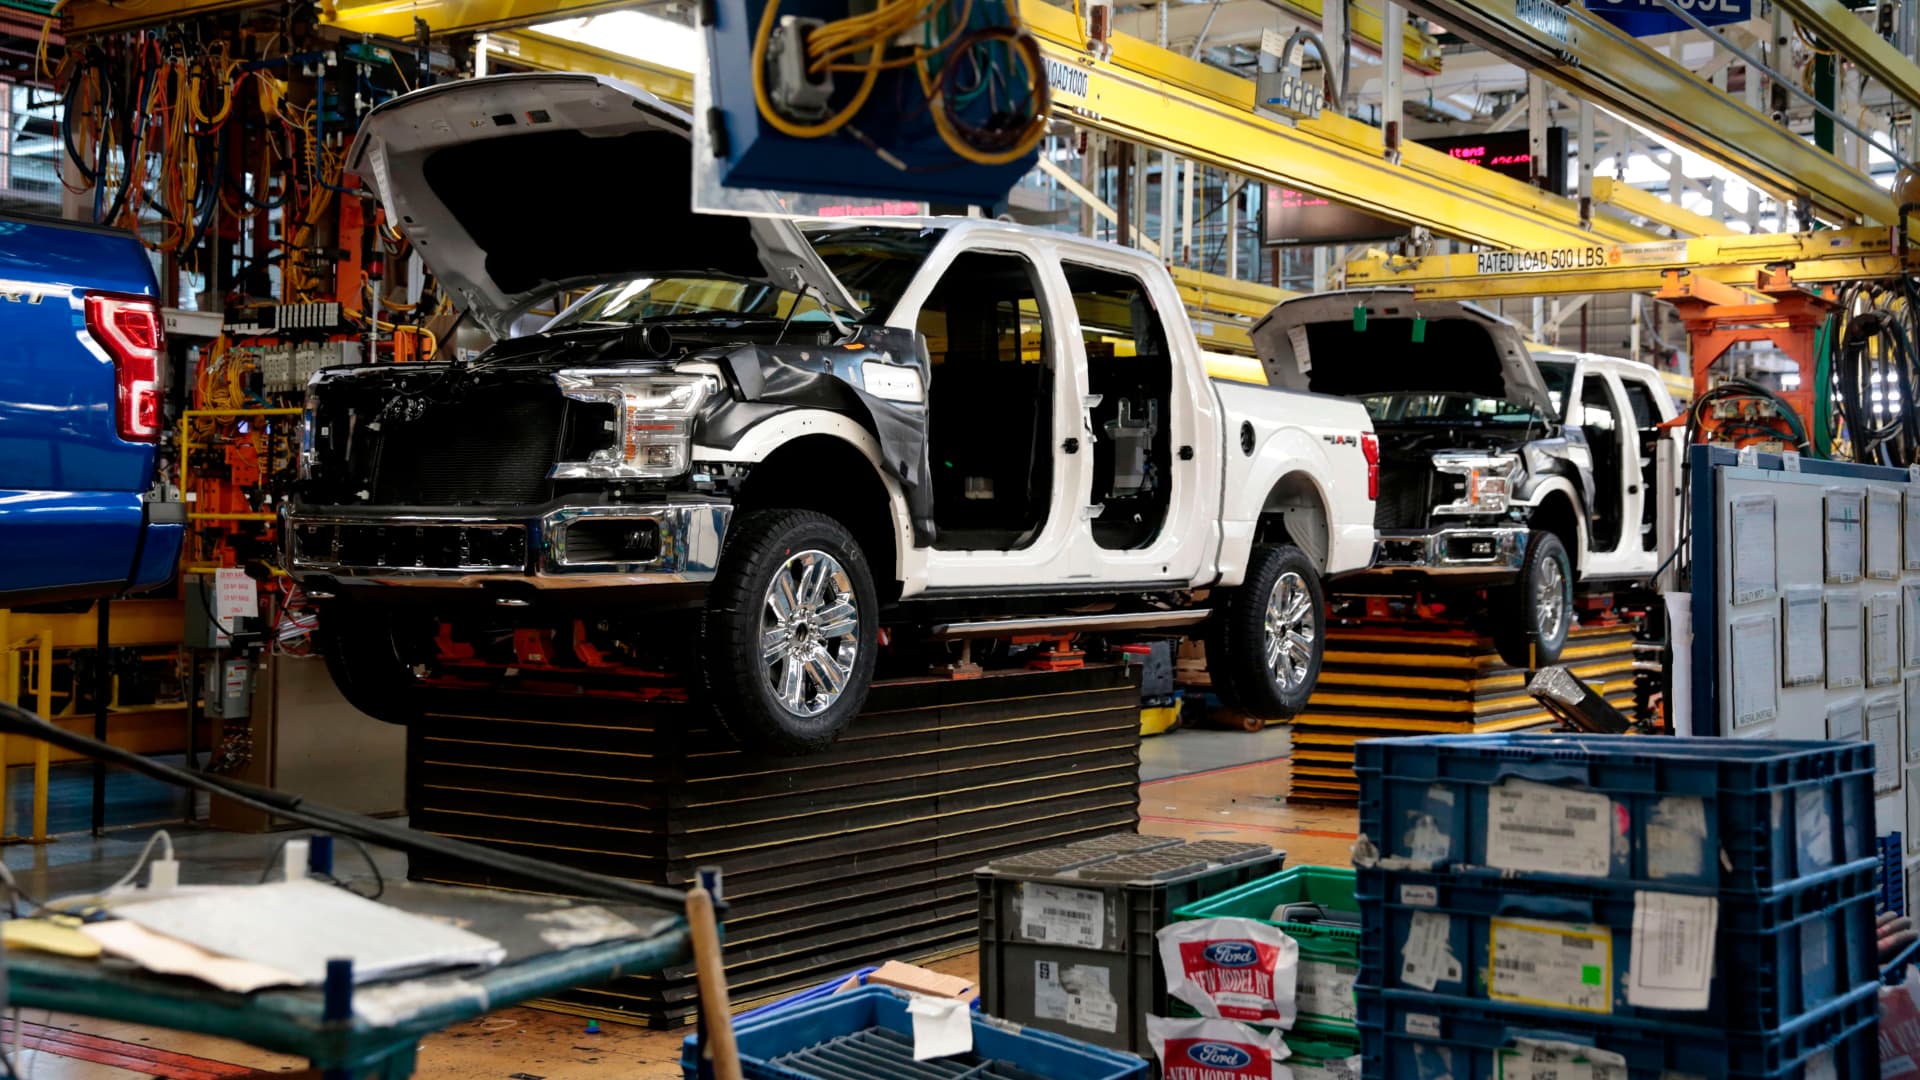 This photo shows Ford 2018 and 2019 F-150 trucks on the assembly line at the Ford Motor Company's Rouge Complex on September 27, 2018 in Dearborn, Michigan.